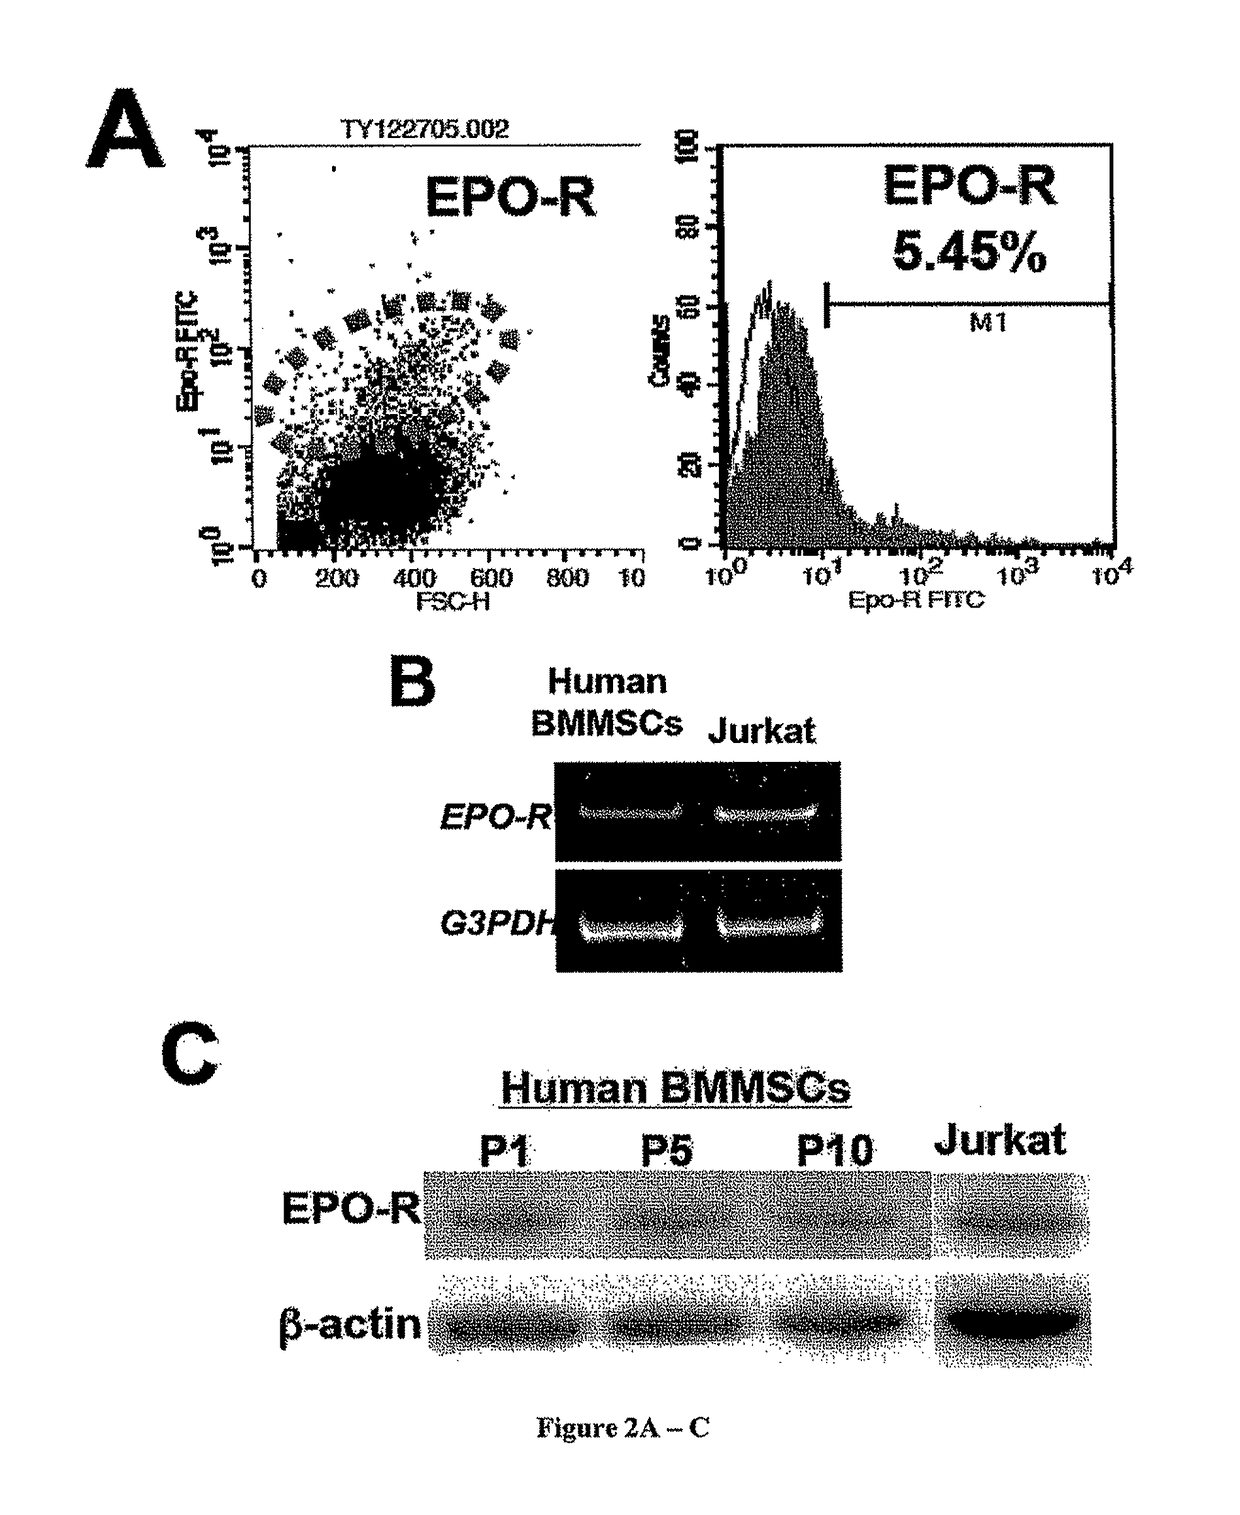 Method for treating an SLE-like autoimmune disease in a human subject consisting of administering stem cells from human exfoliated deciduous teeth (SHED) and erythropoietin (EPO) to said human subject